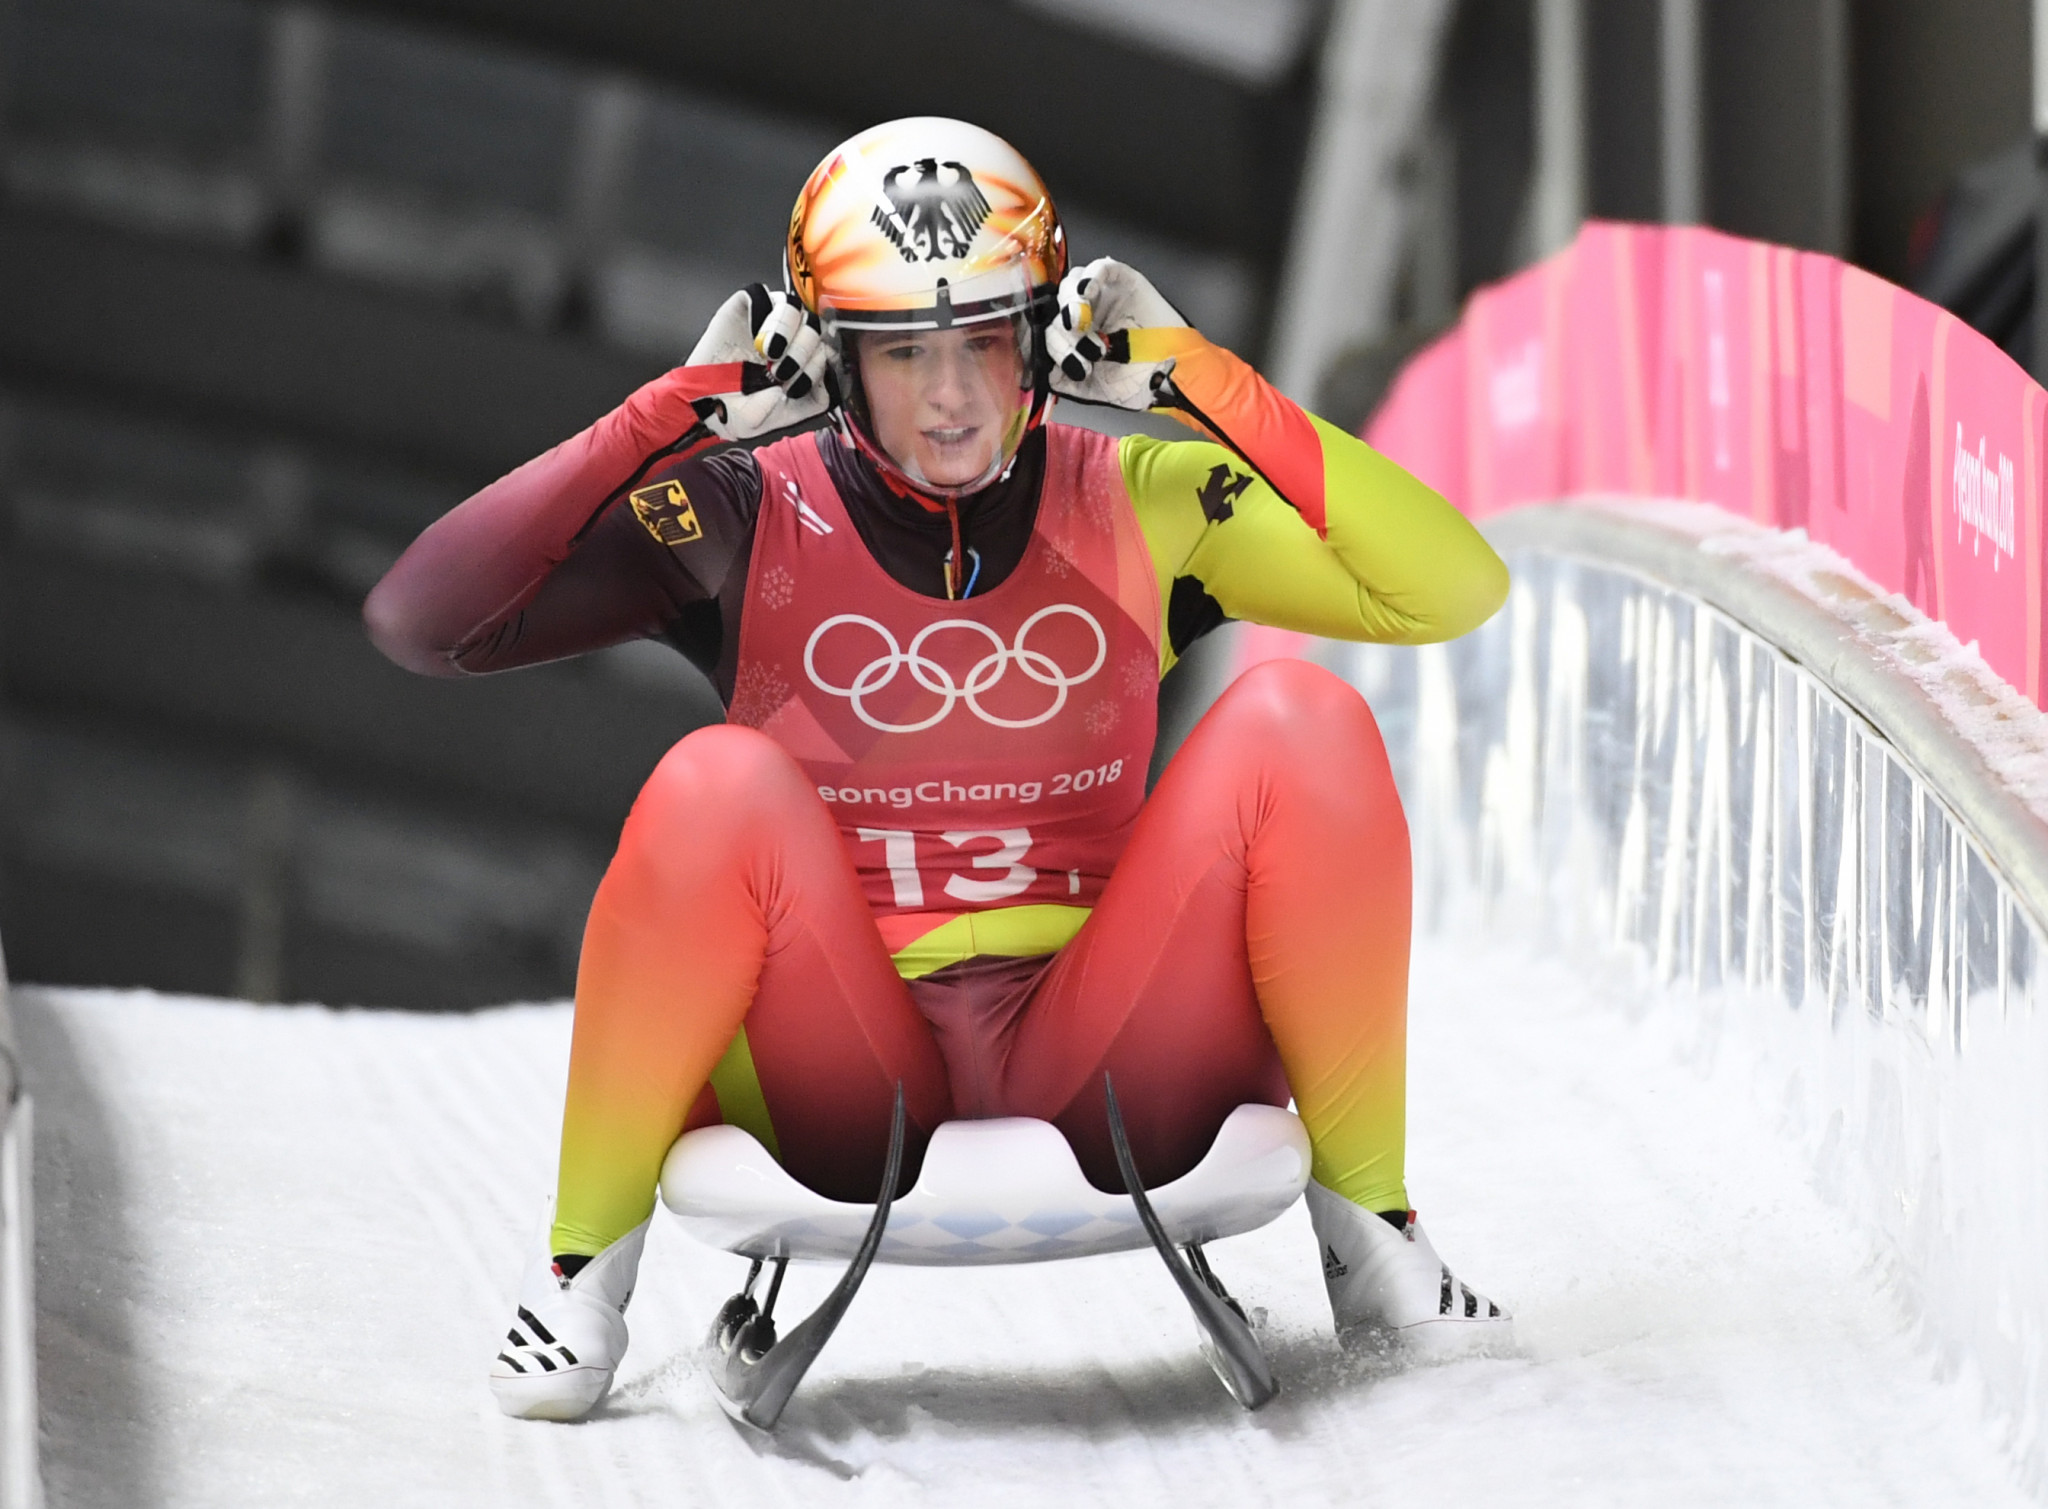 Four-time Olympic champion Natalie Geisenberger of Germany maintained her perfect start to the new Luge World Cup season ©Getty Images